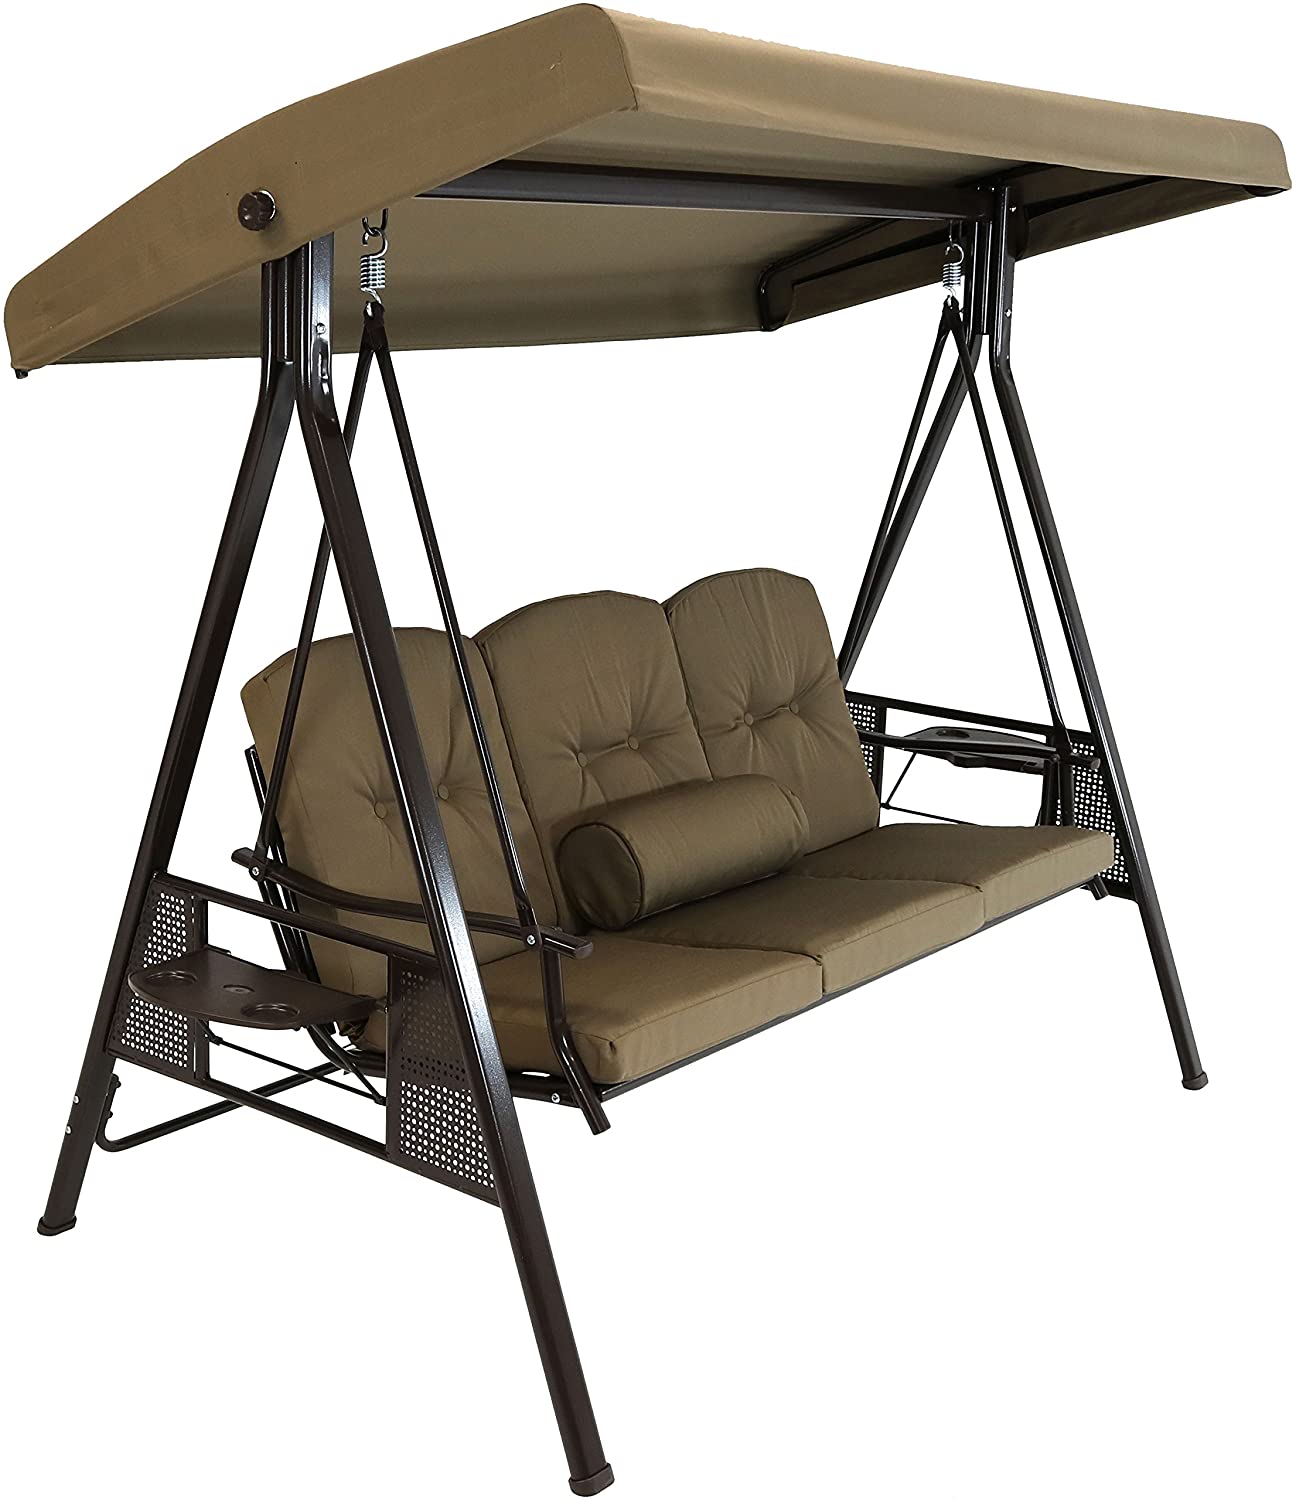 Patio Watcher 3-Seat Deluxe Outdoor Patio Porch Swing with Cup,Weather Resistant Steel Frame, Adjustable Tilt Canopy